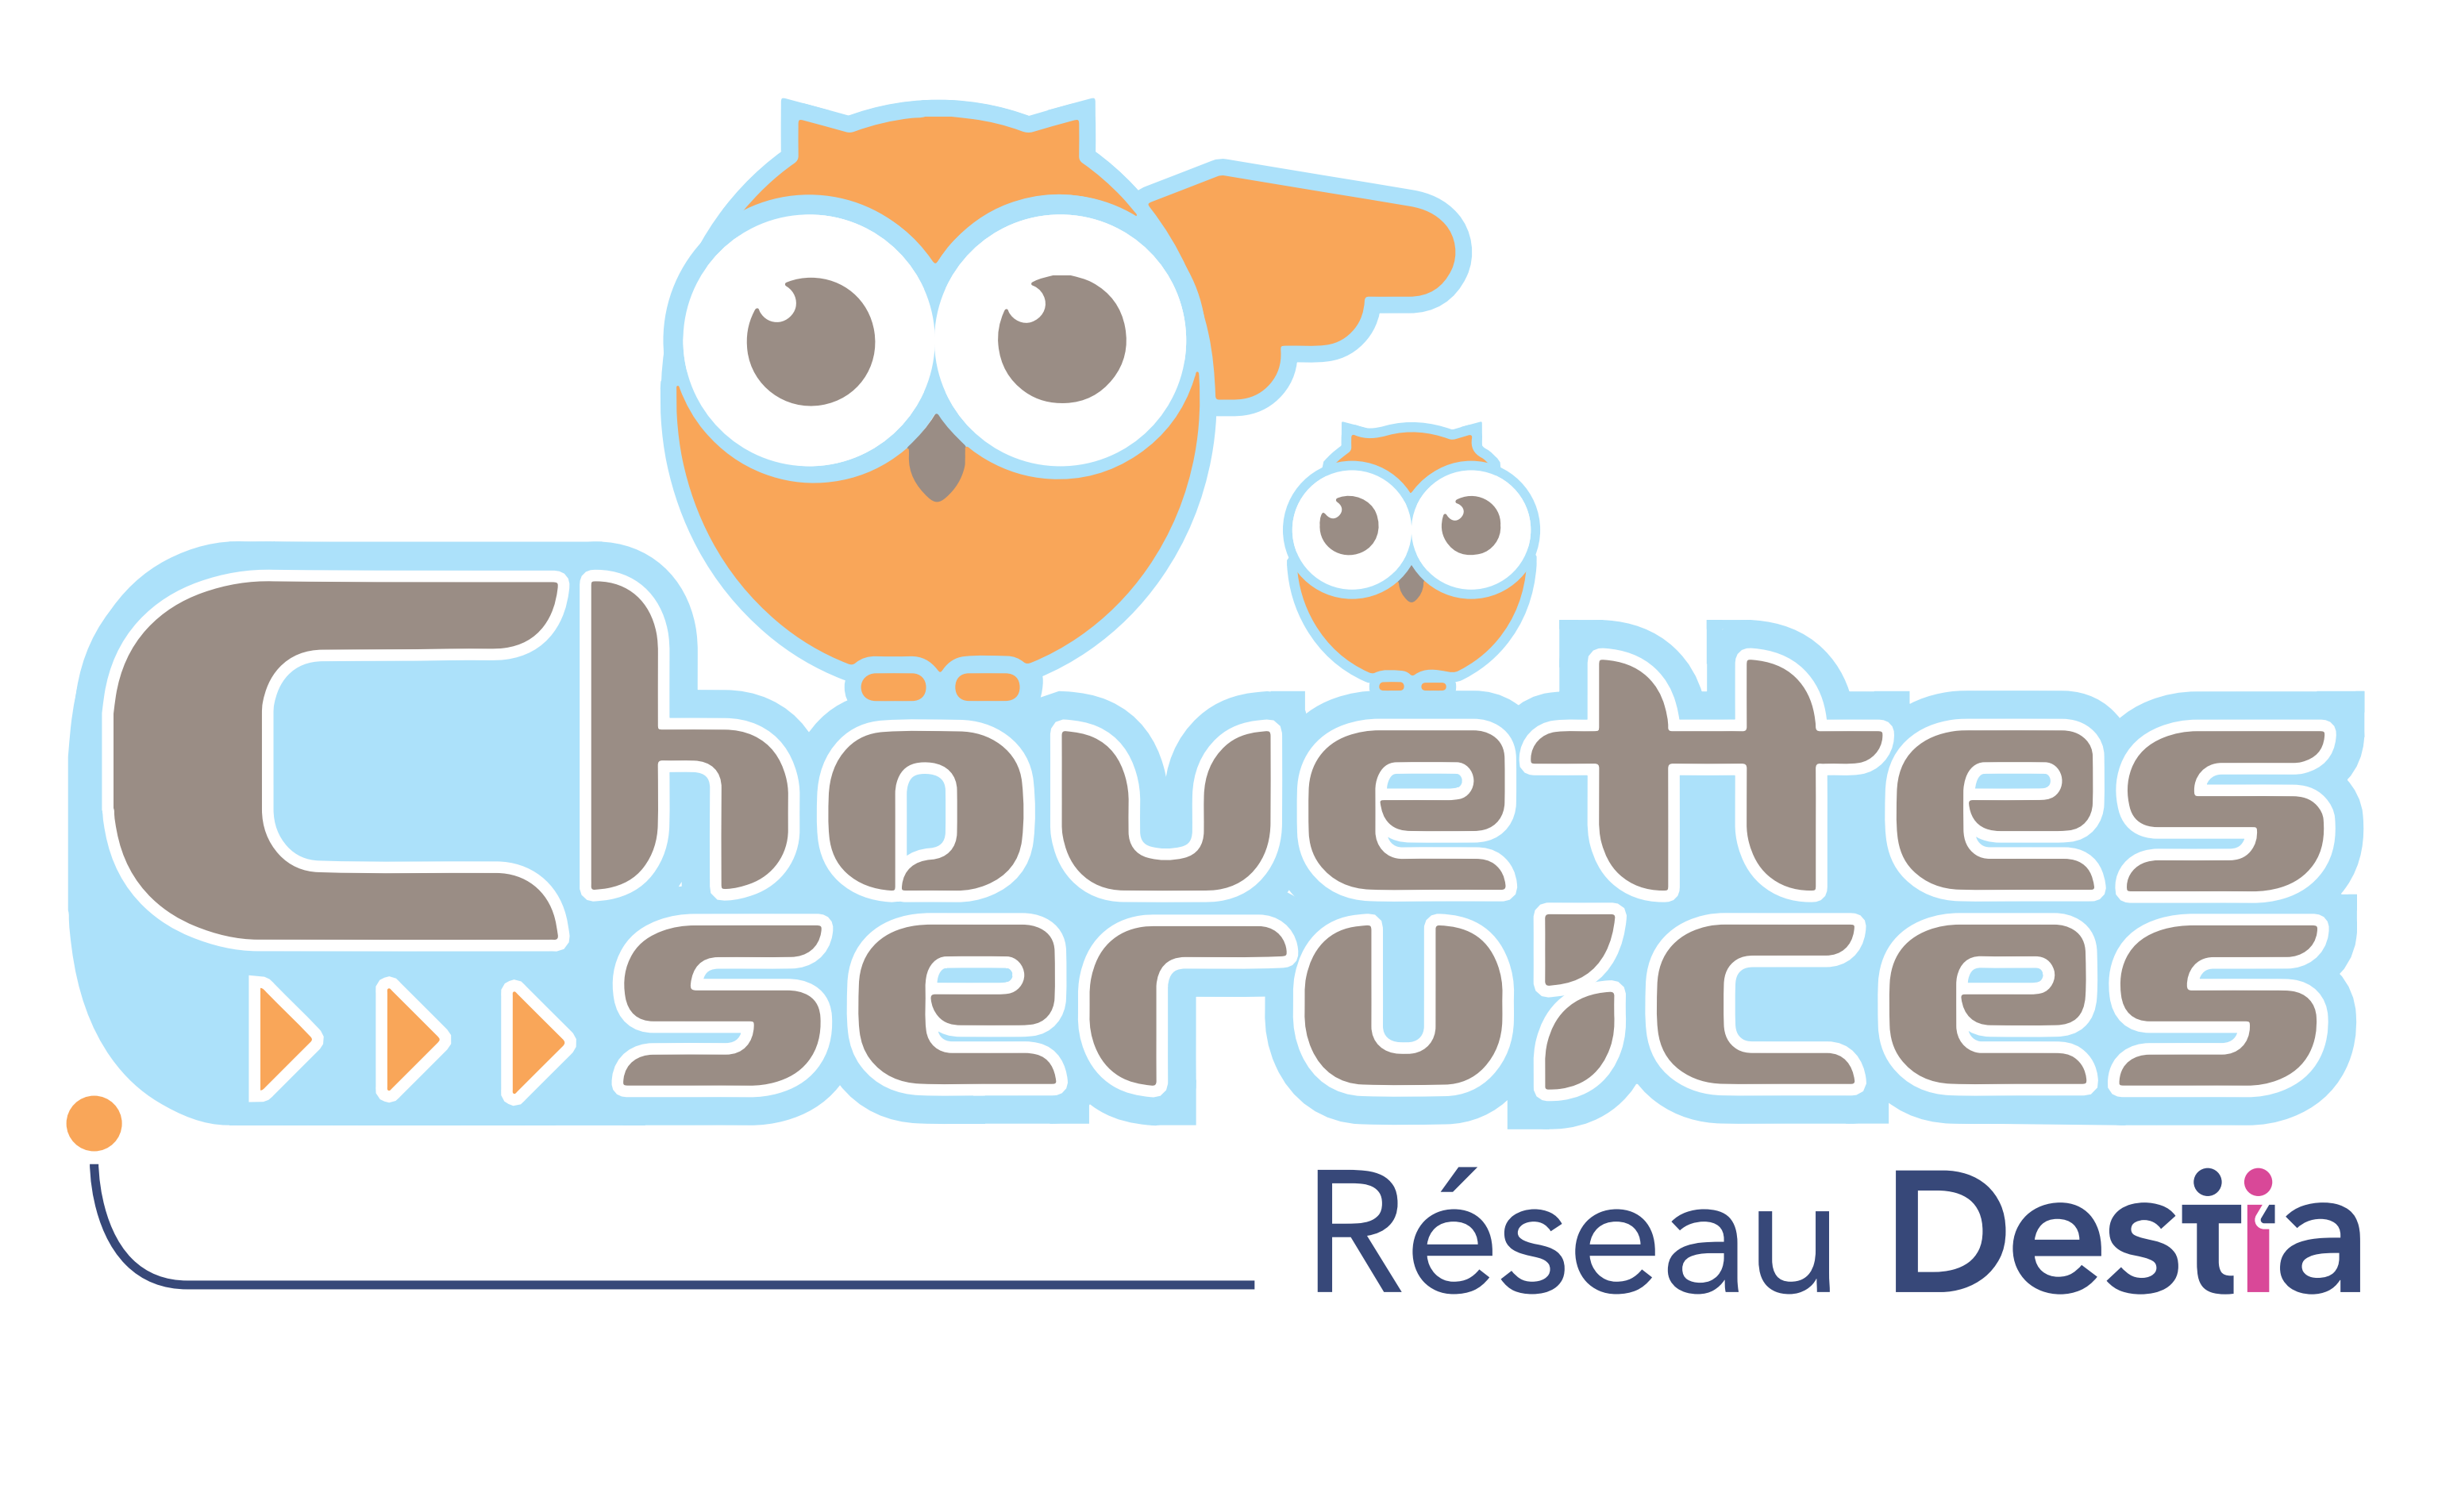 Chouettes Services